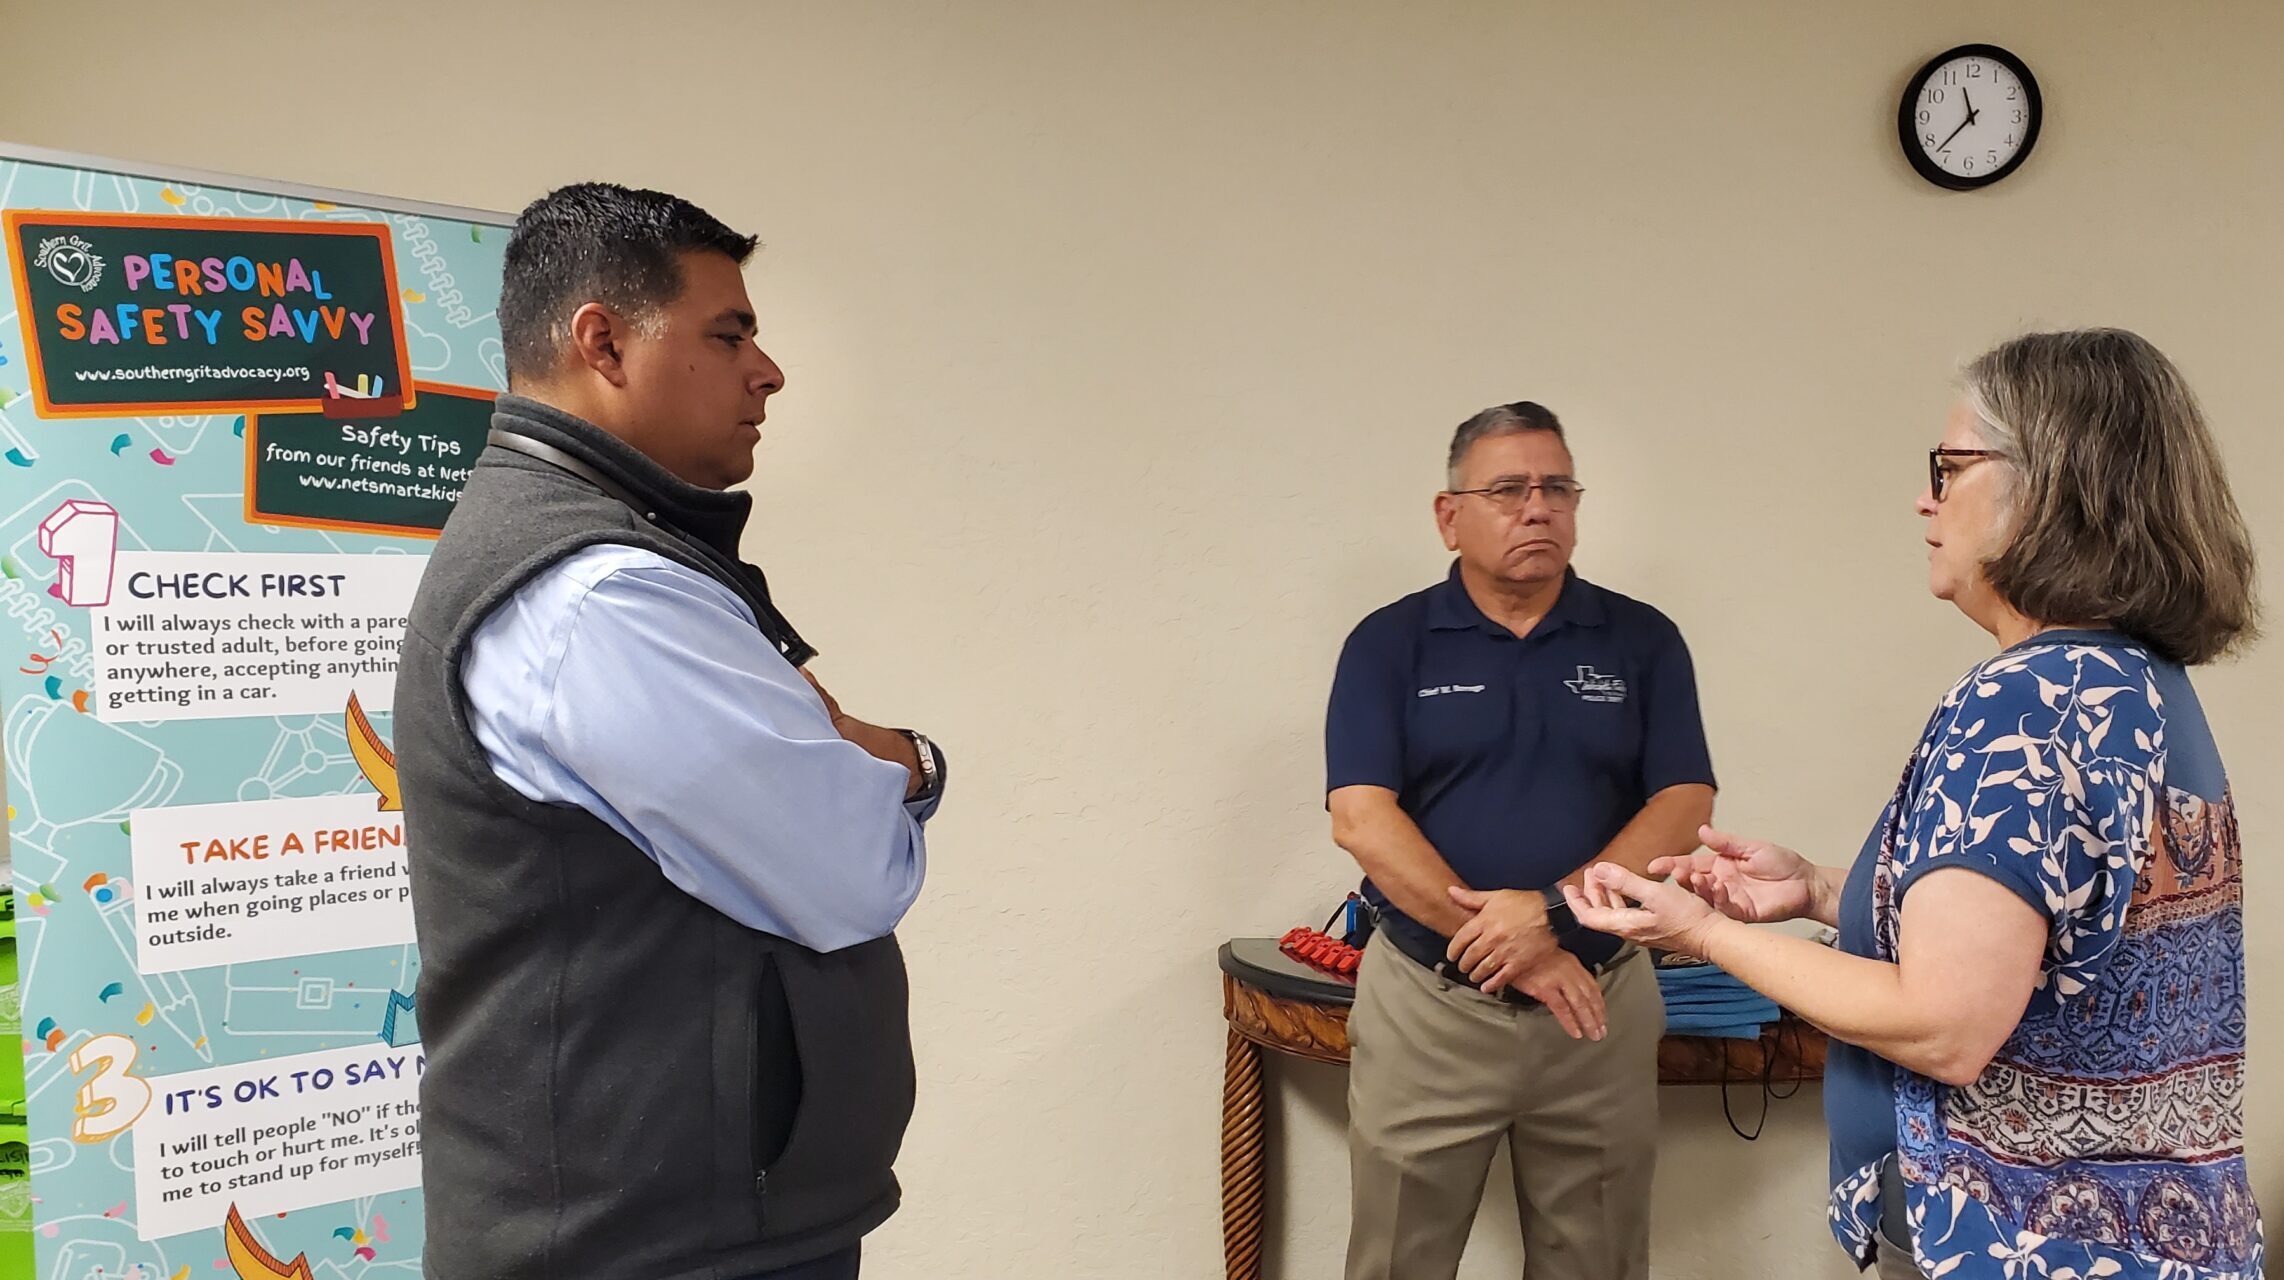 Wichita Falls Mayor Stephen Santellana discusses human trafficking in Wichita Falls with Chief of Police Manuel Borrego and Vicky J. Payne, MPA, President/Executive Director of Southern Grit Advocacy